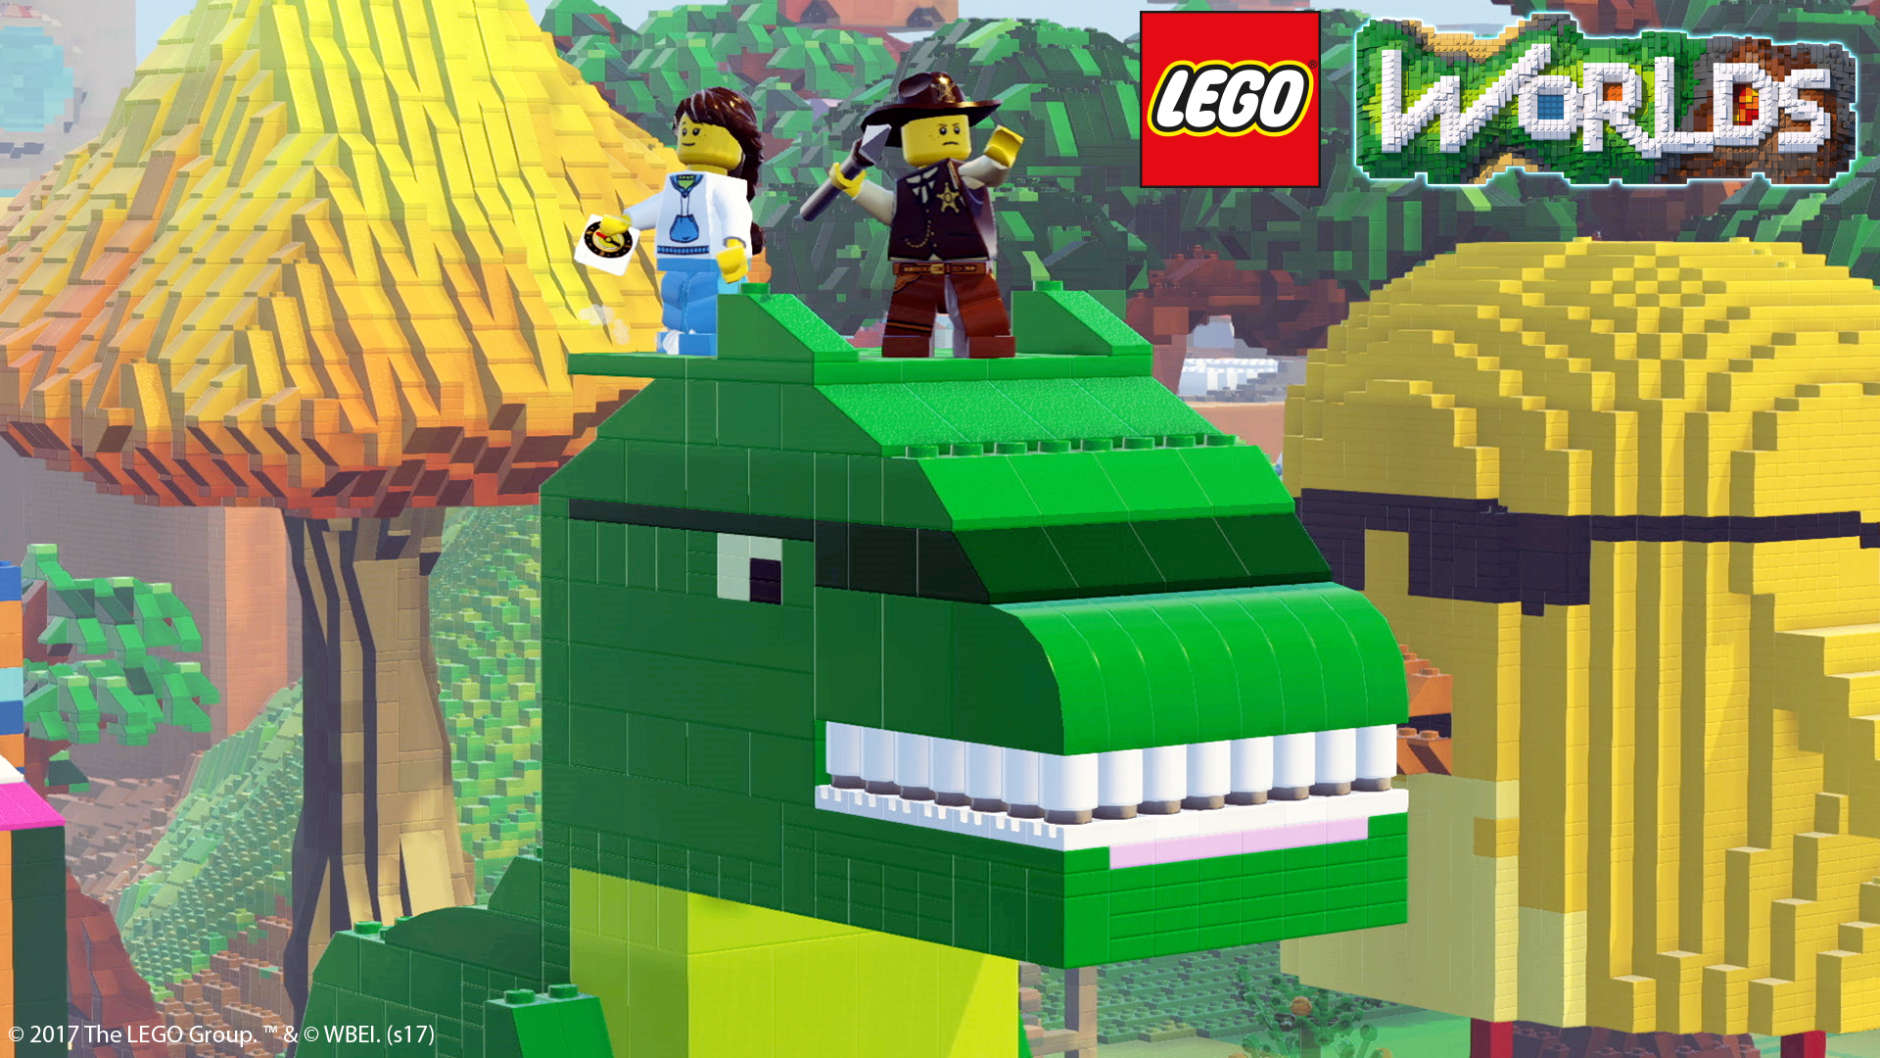 In spite of the ridiculous number of titles, they’re all pretty solid. The quirky charm is there. People want to play them.
But Lego Worlds is a bit disappointing as a whole. (Warner Bros. Interactive)